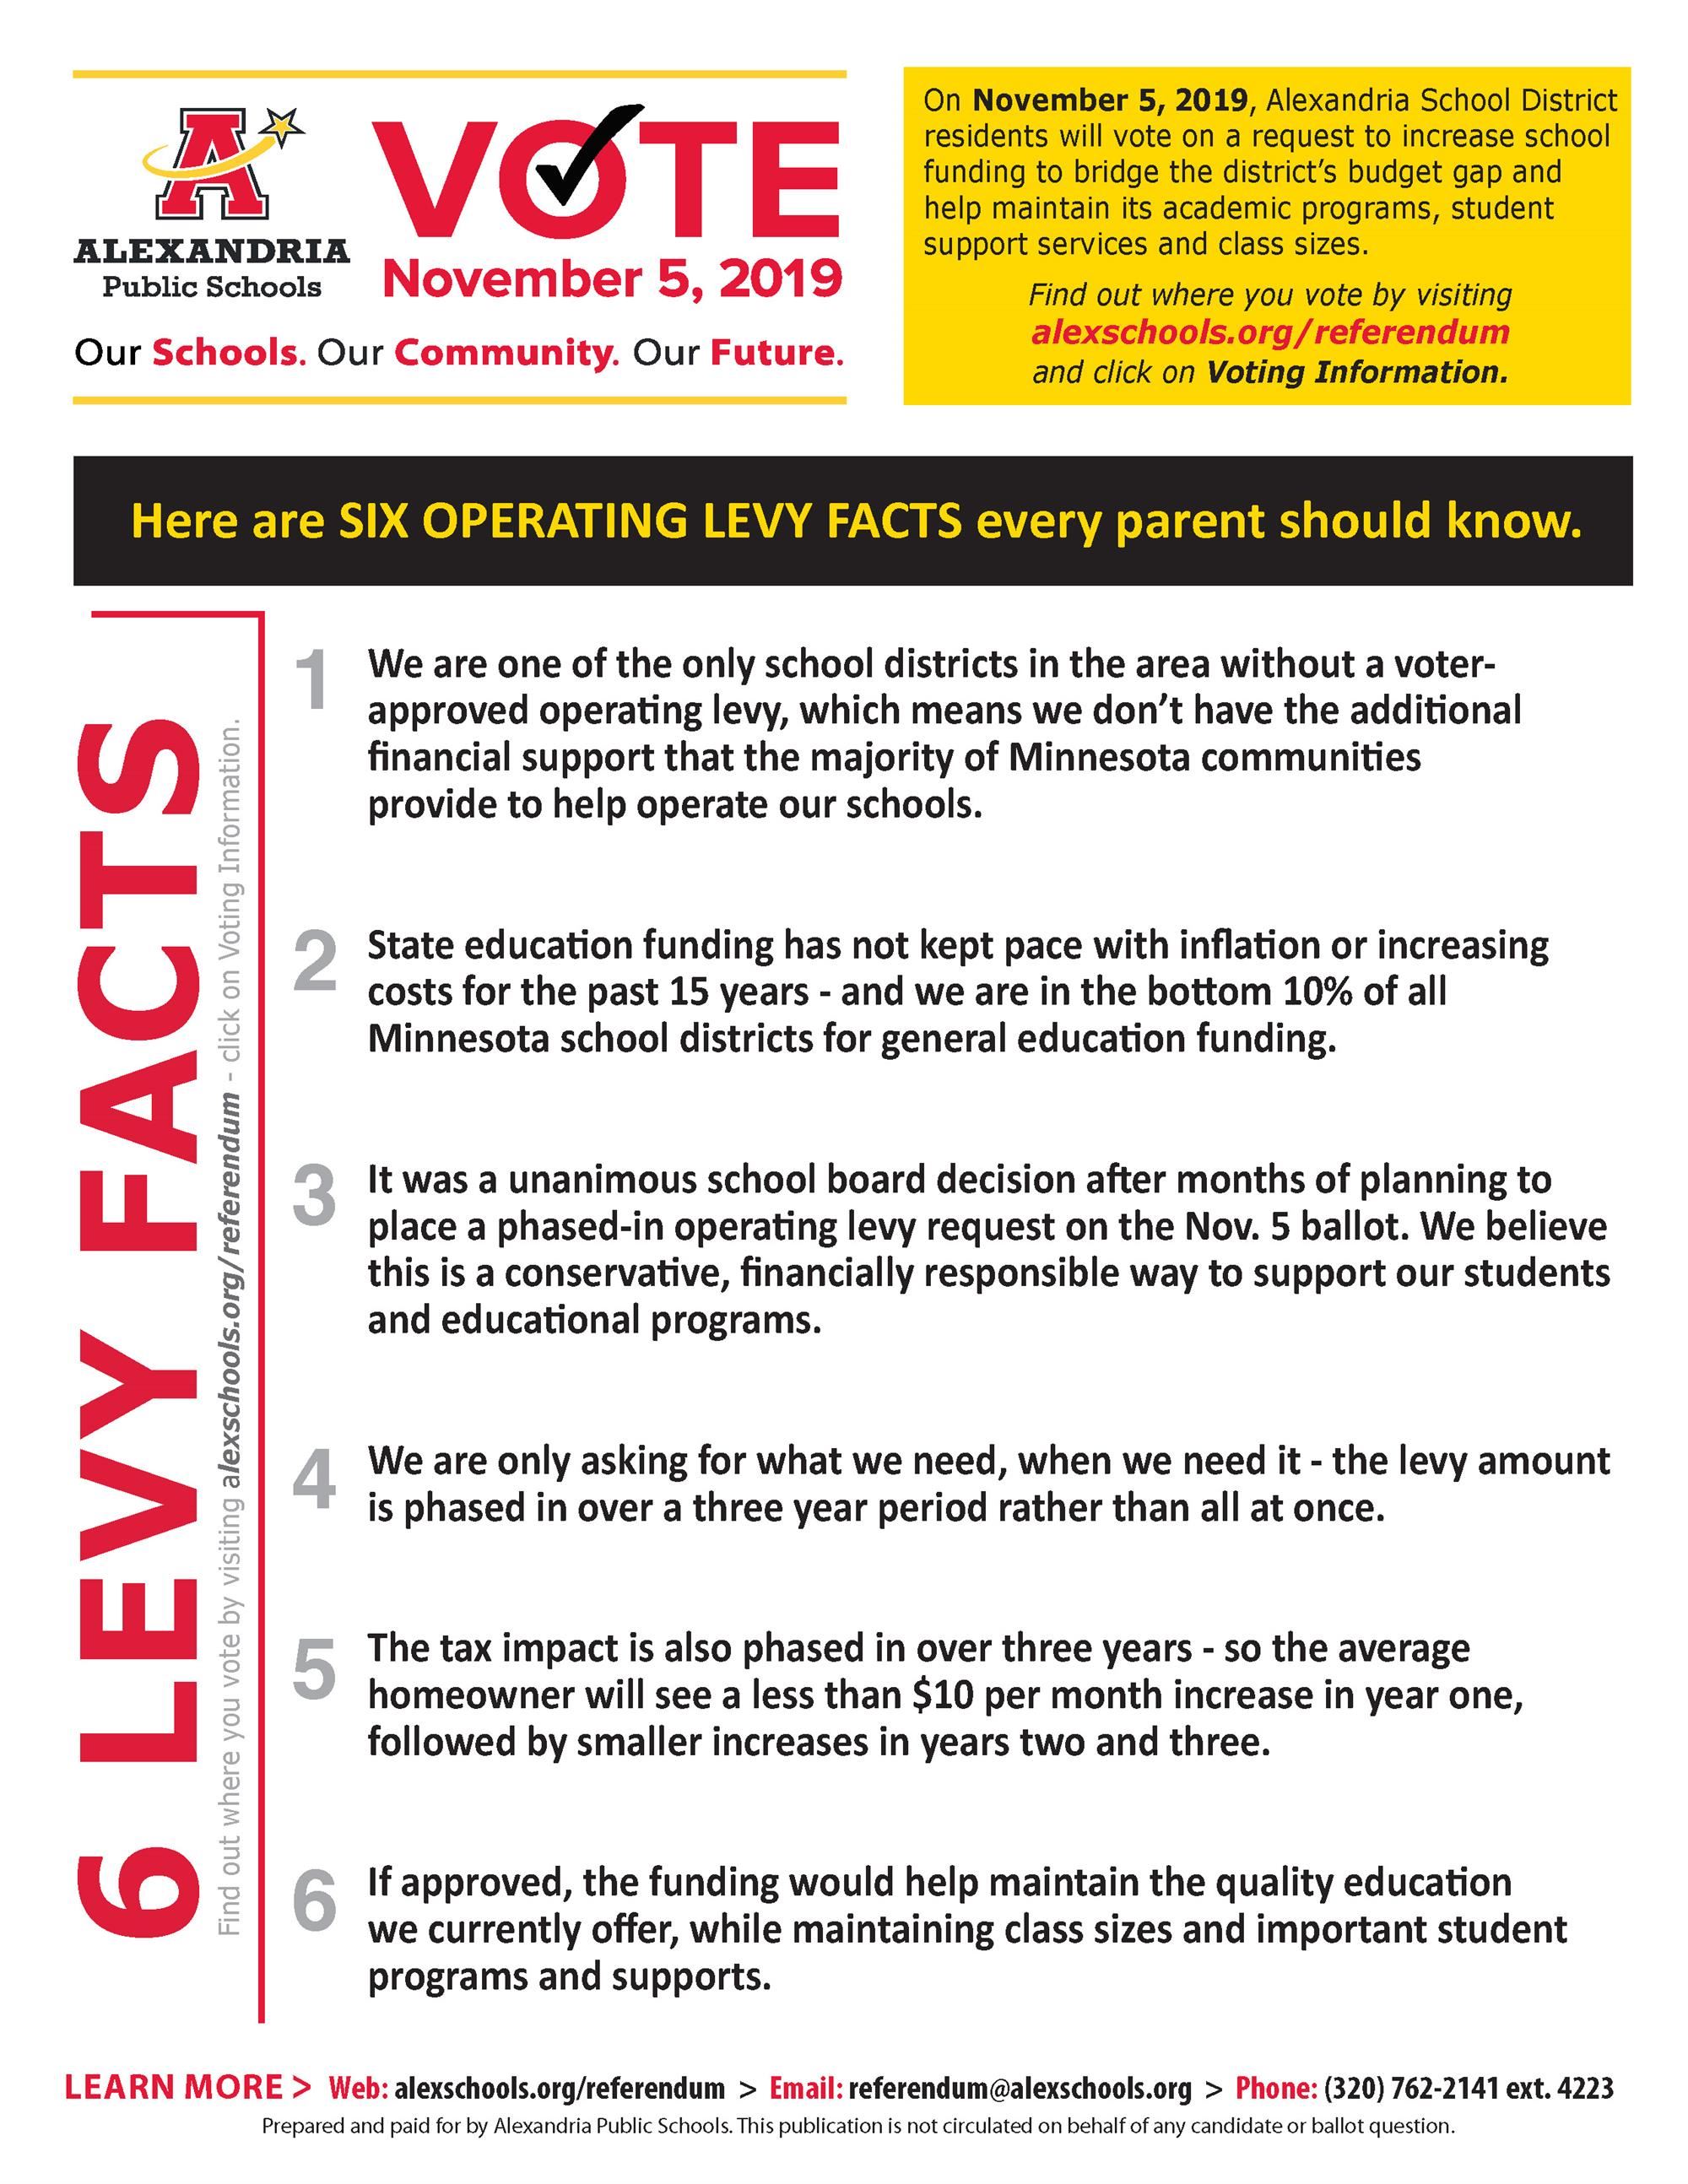 Six Operating Levy Facts 